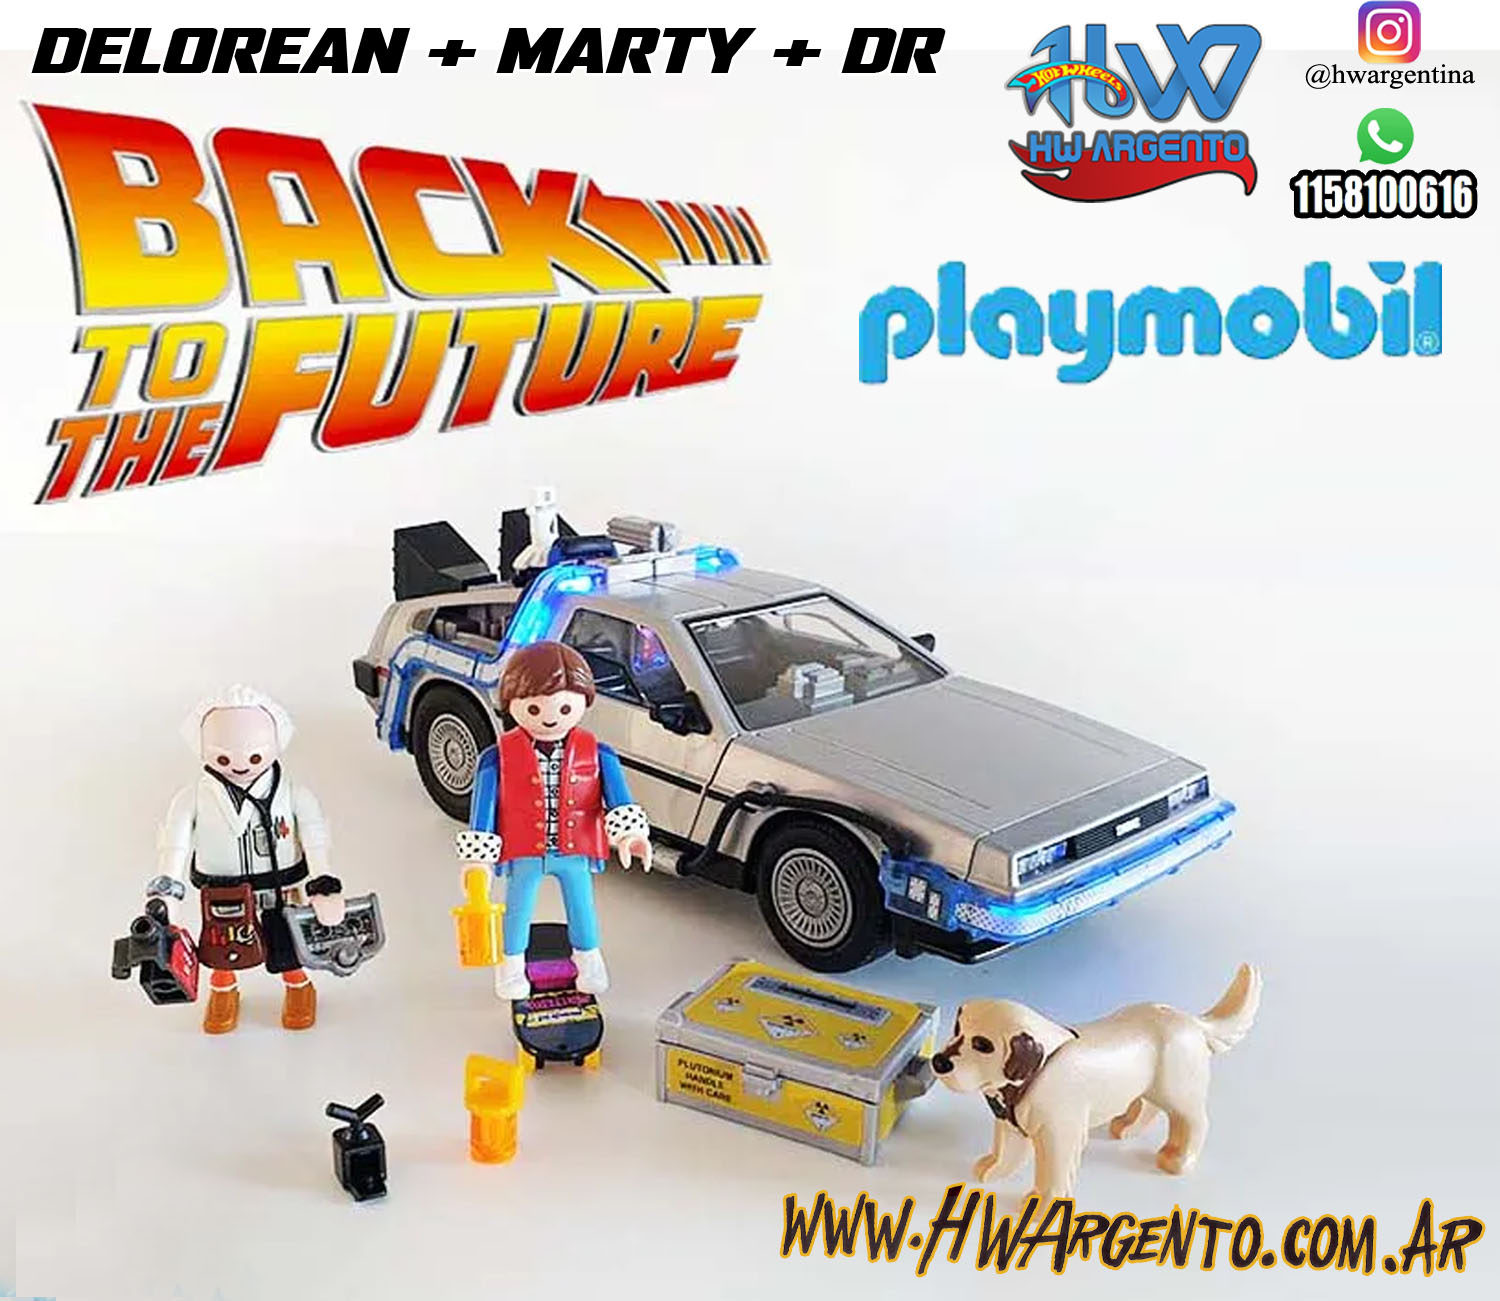 Deloean Armable Playmobil Back To The Future Playmobil